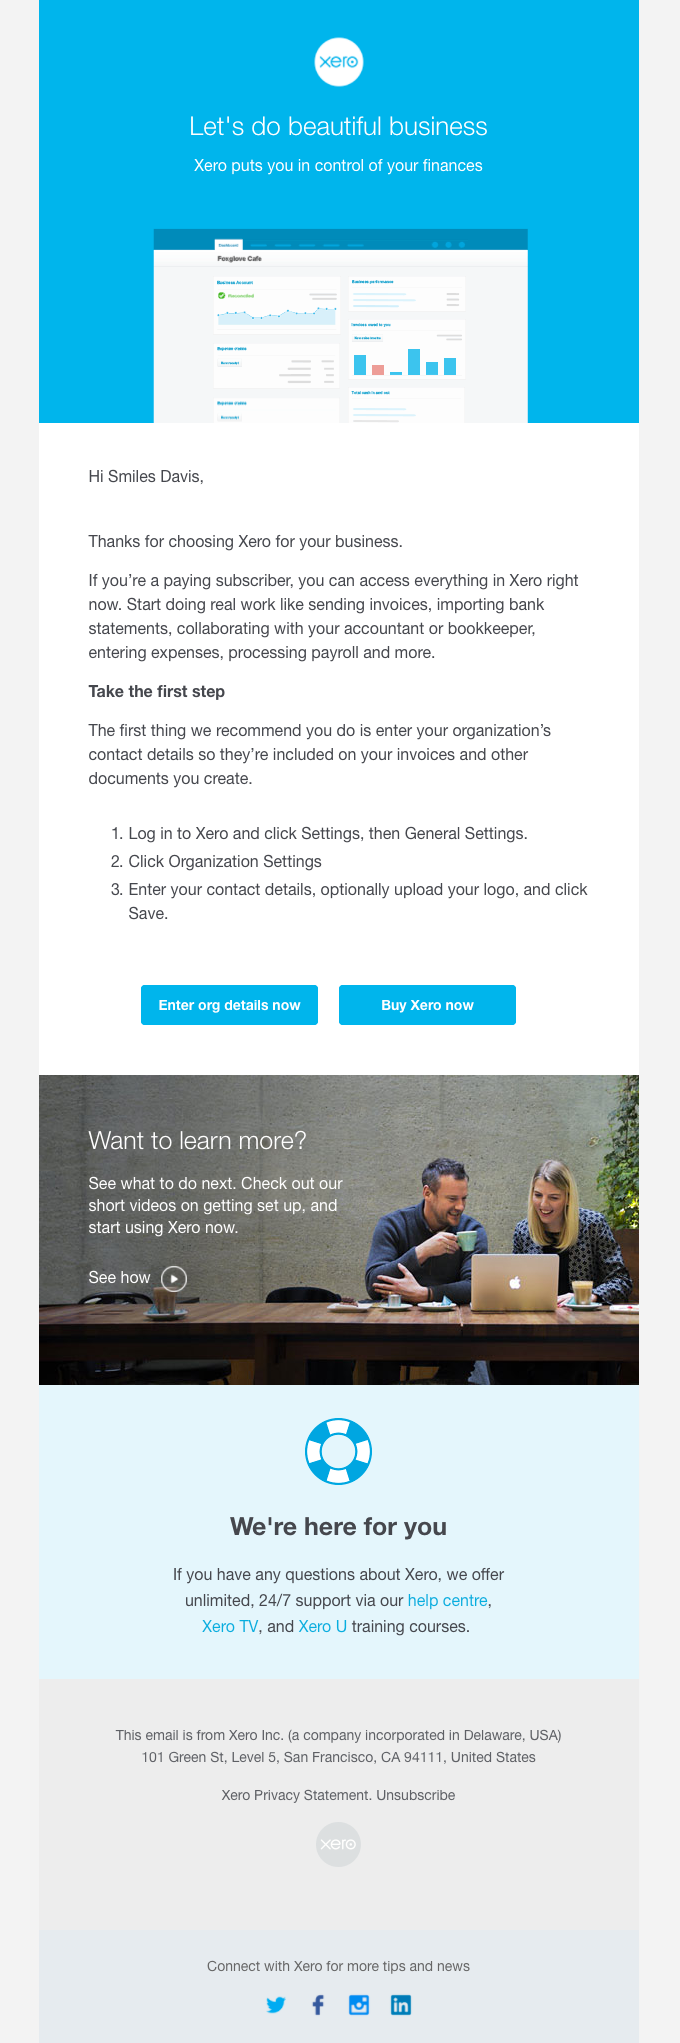 Welcome to Xero — let’s get started